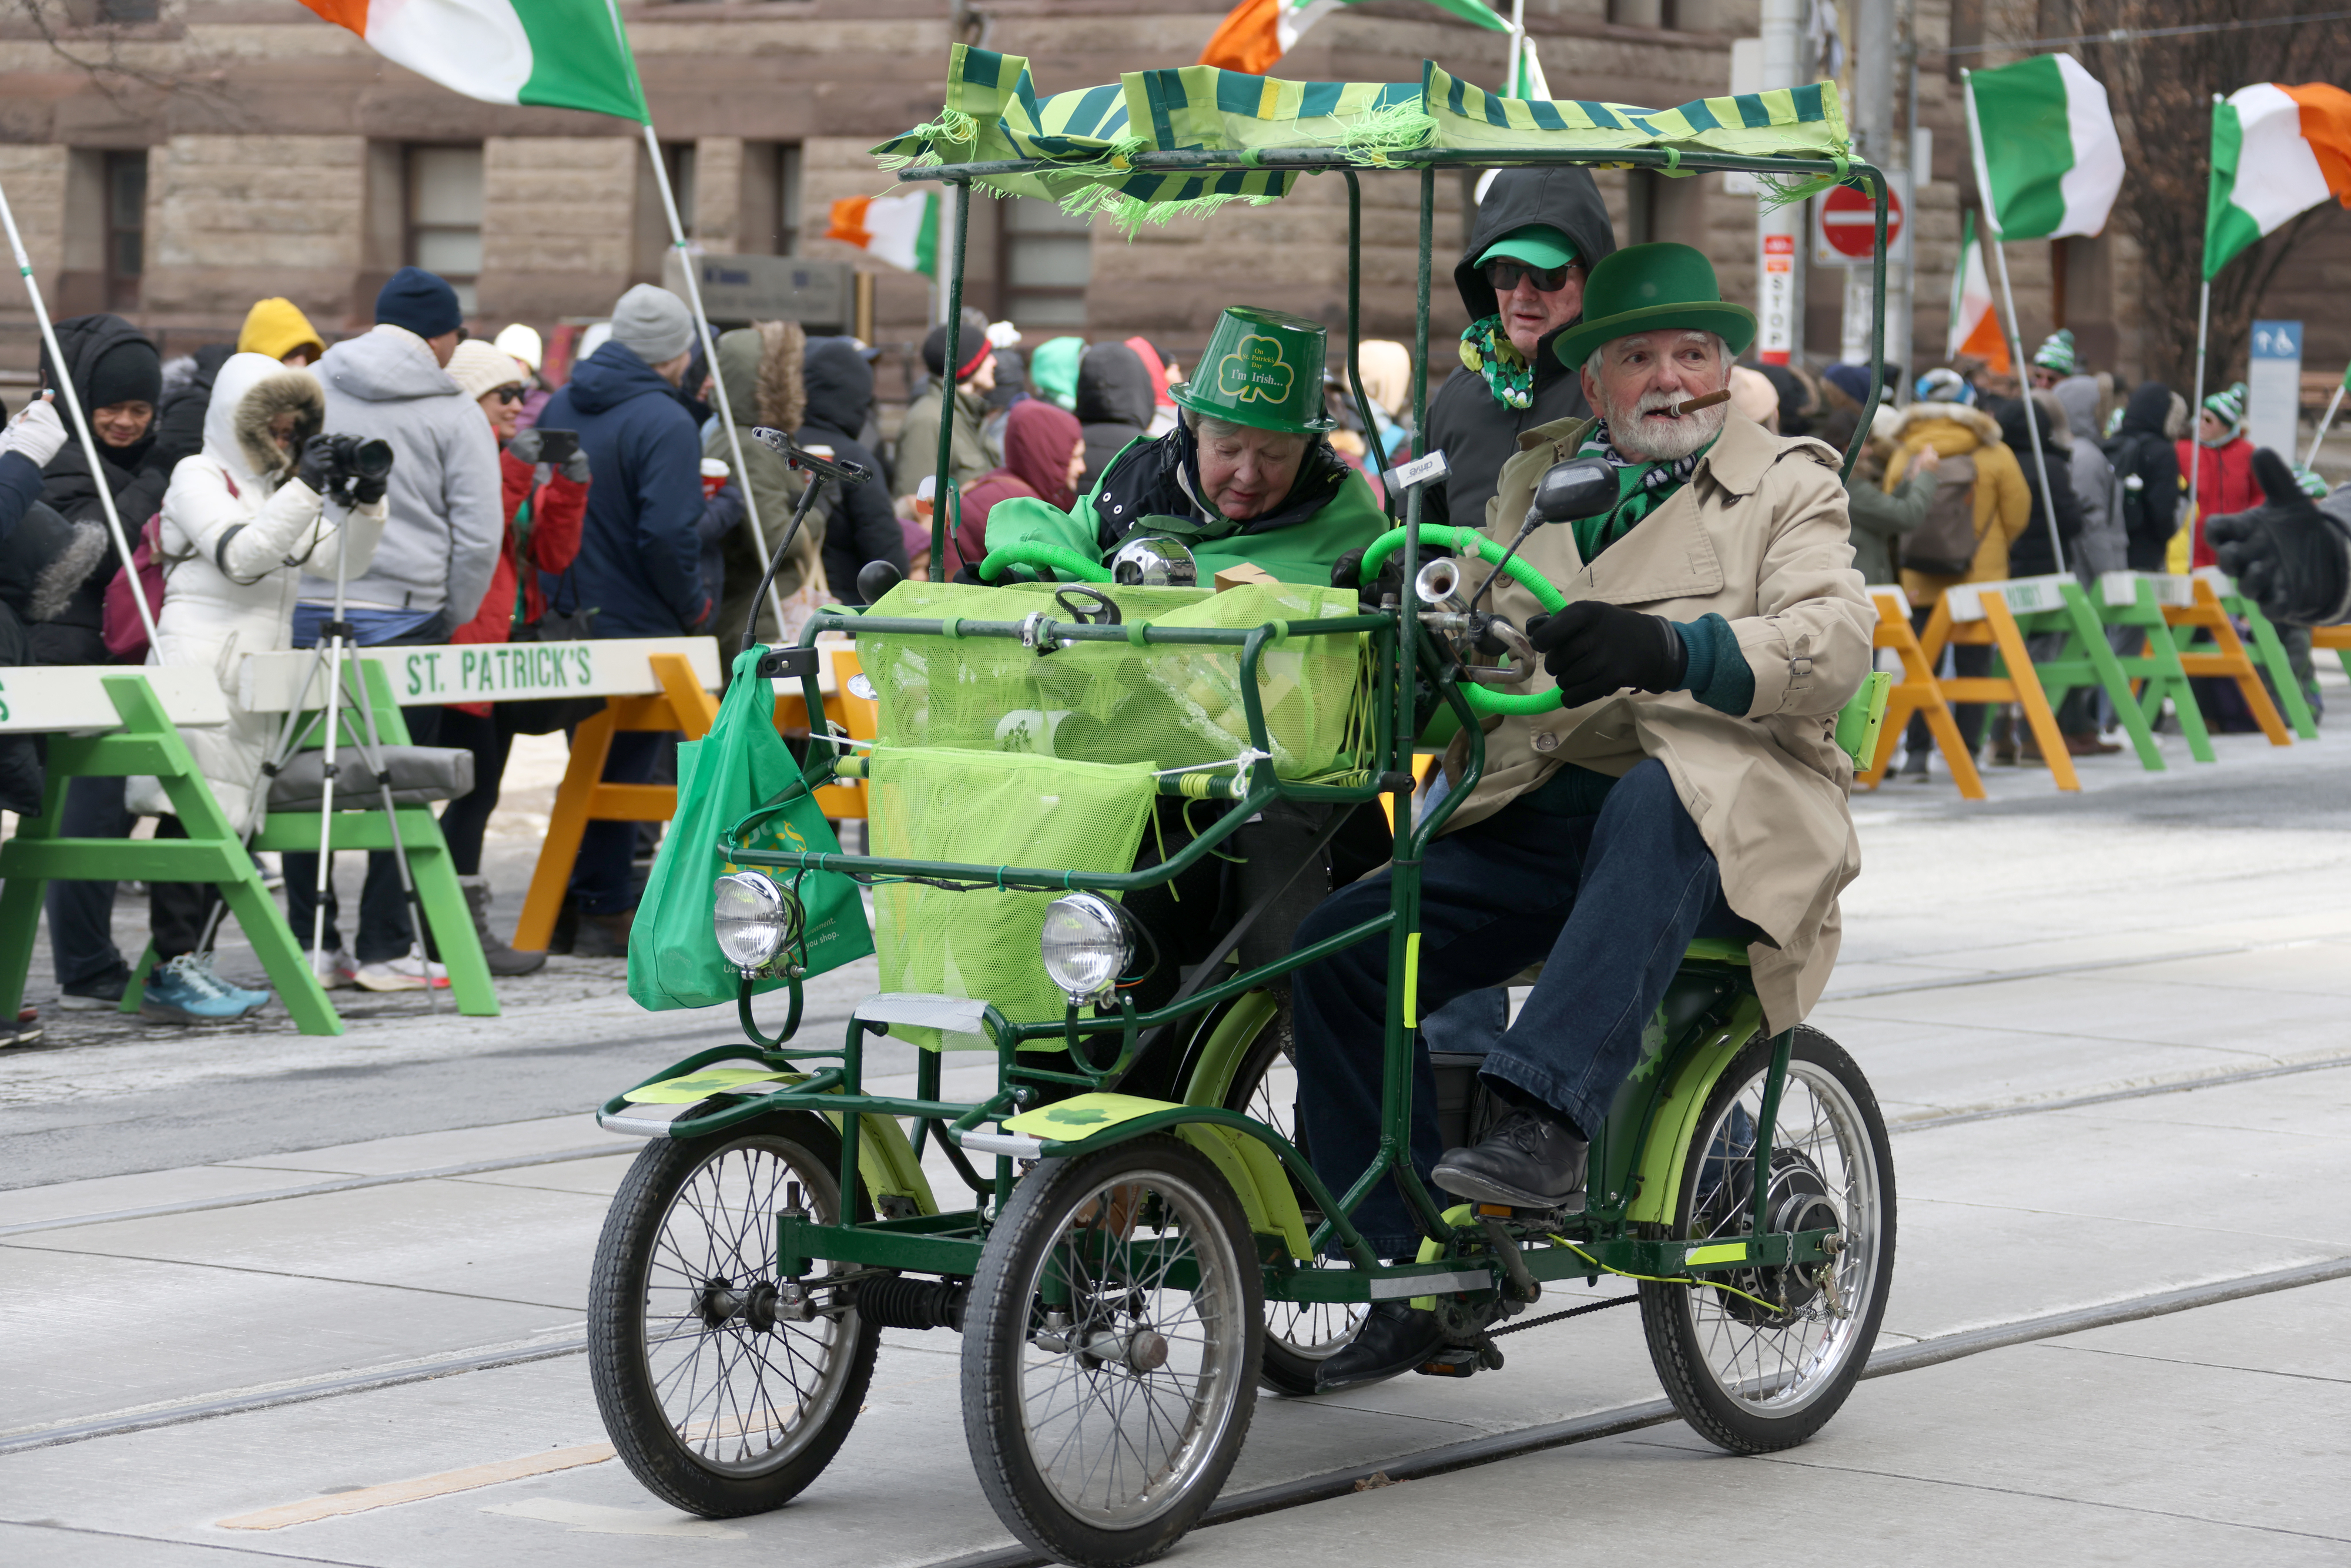 Three people in a green cart in a parade